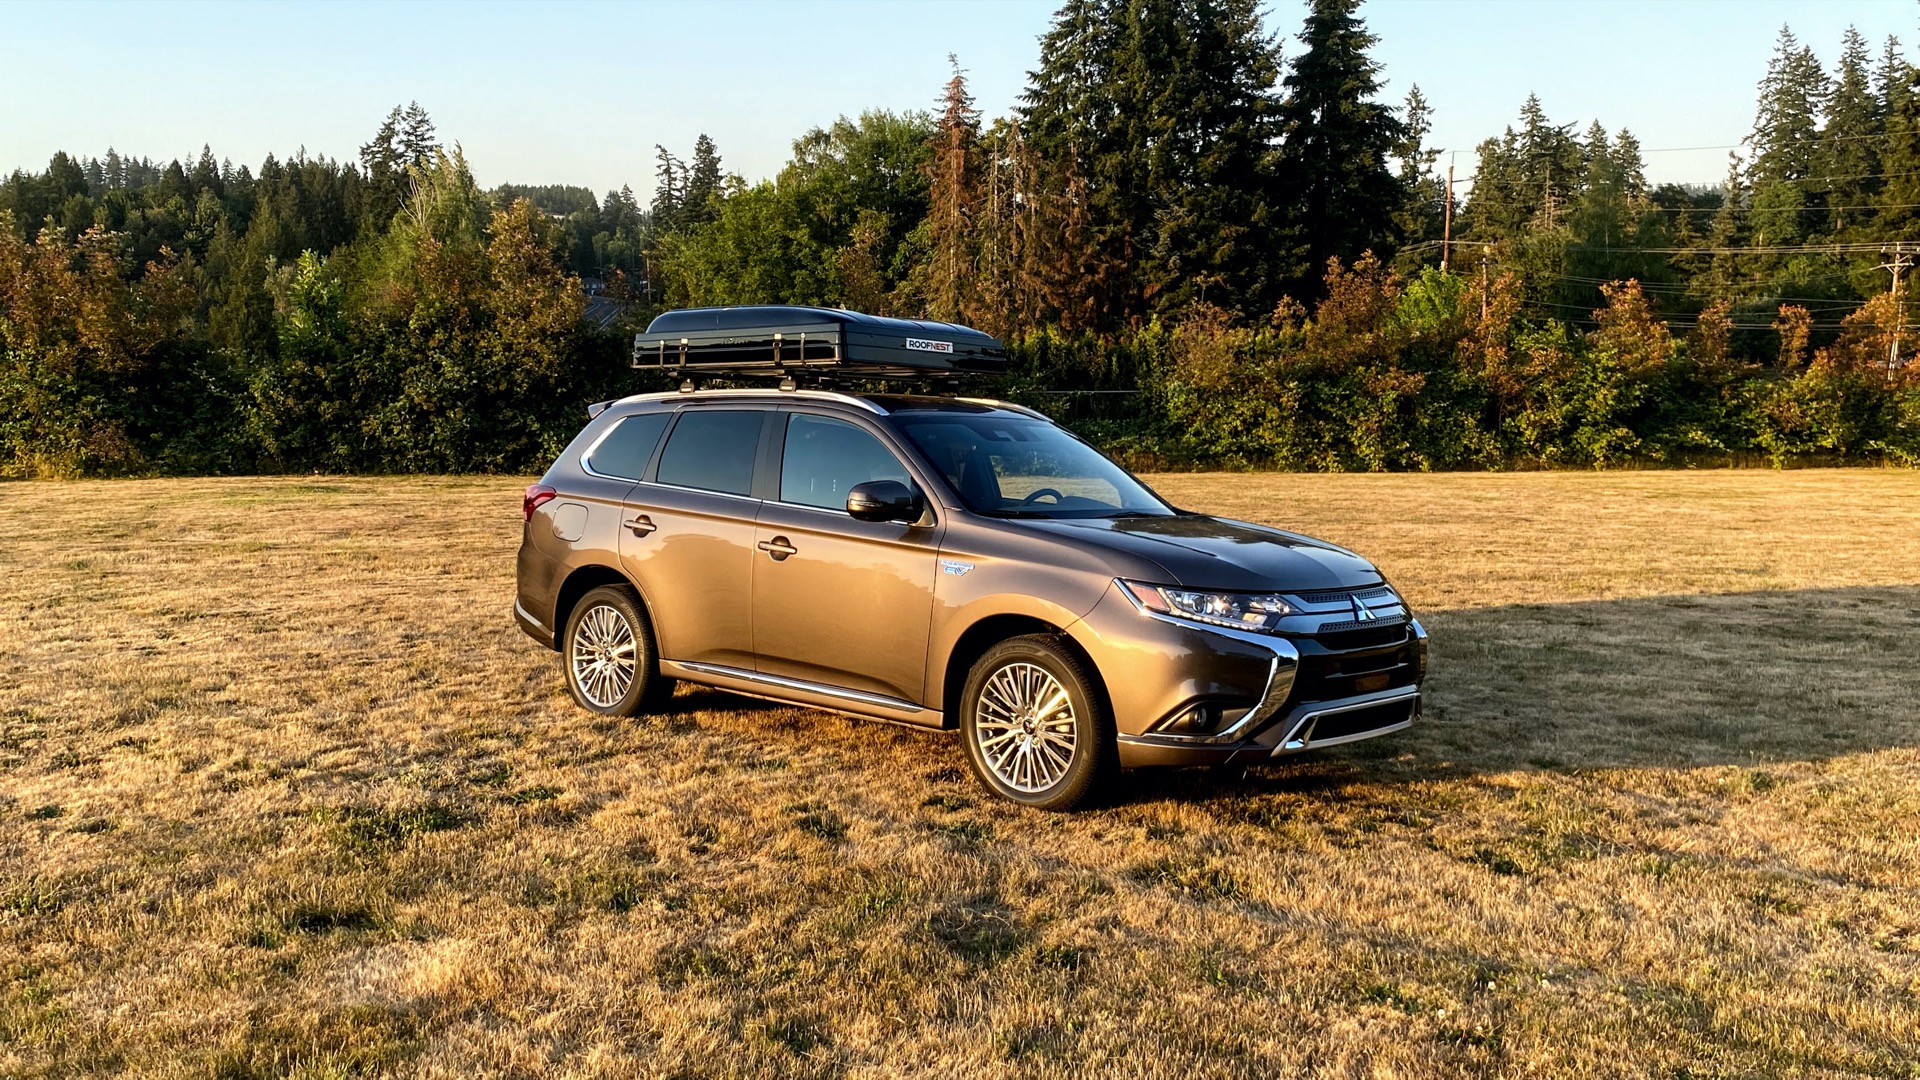 Tested: 2021 Mitsubishi Outlander PHEV and Roofnest are go-light getaway gearTested: 2021 Mitsubishi Outlander PHEV and Roofnest are go-light getaway gear